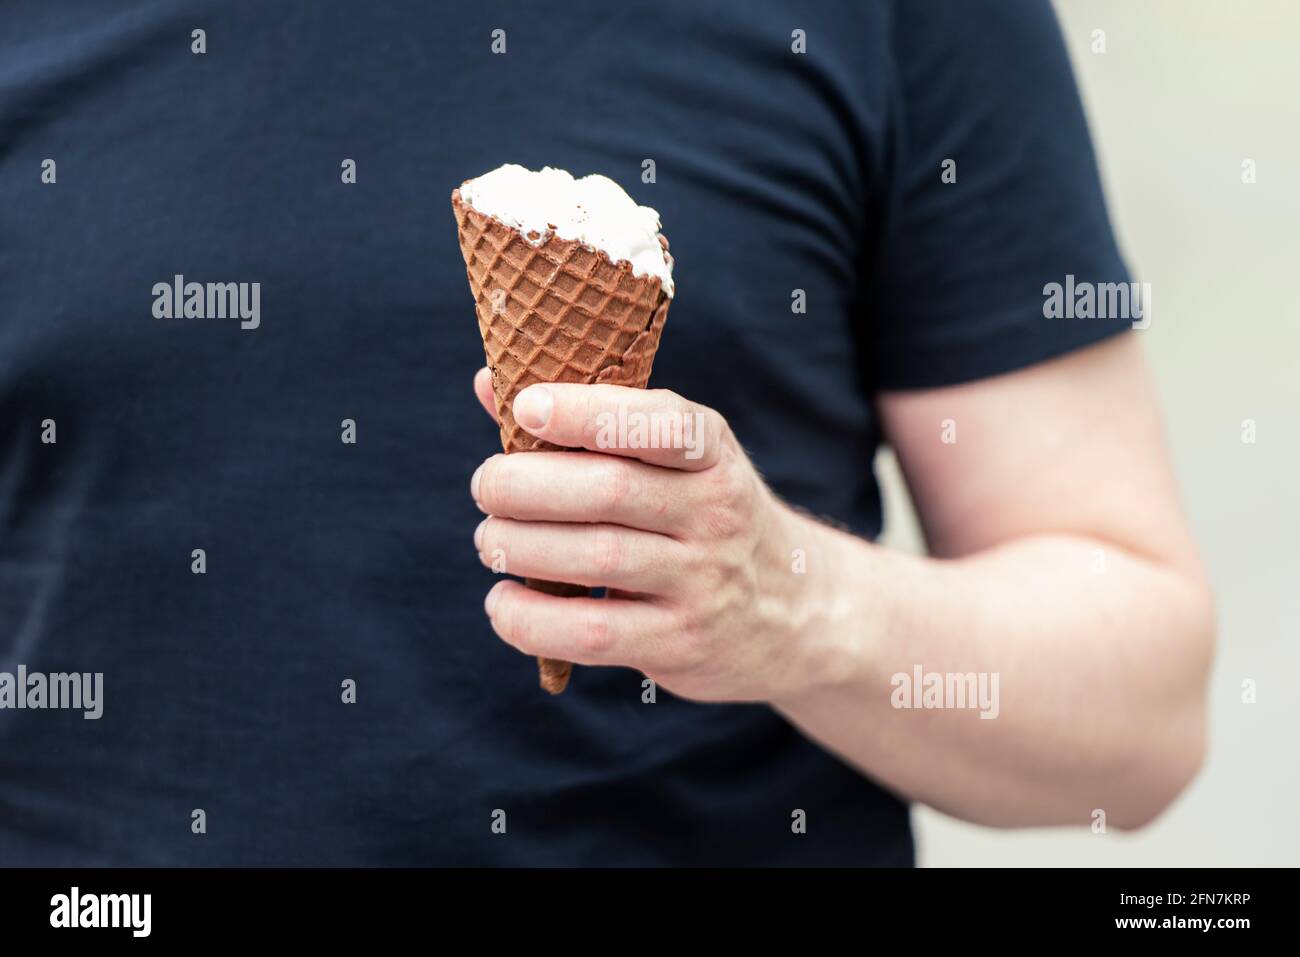 A brutal man dressed in black t-shirt holding an Ice cream in his hand at a city park Stock Photo